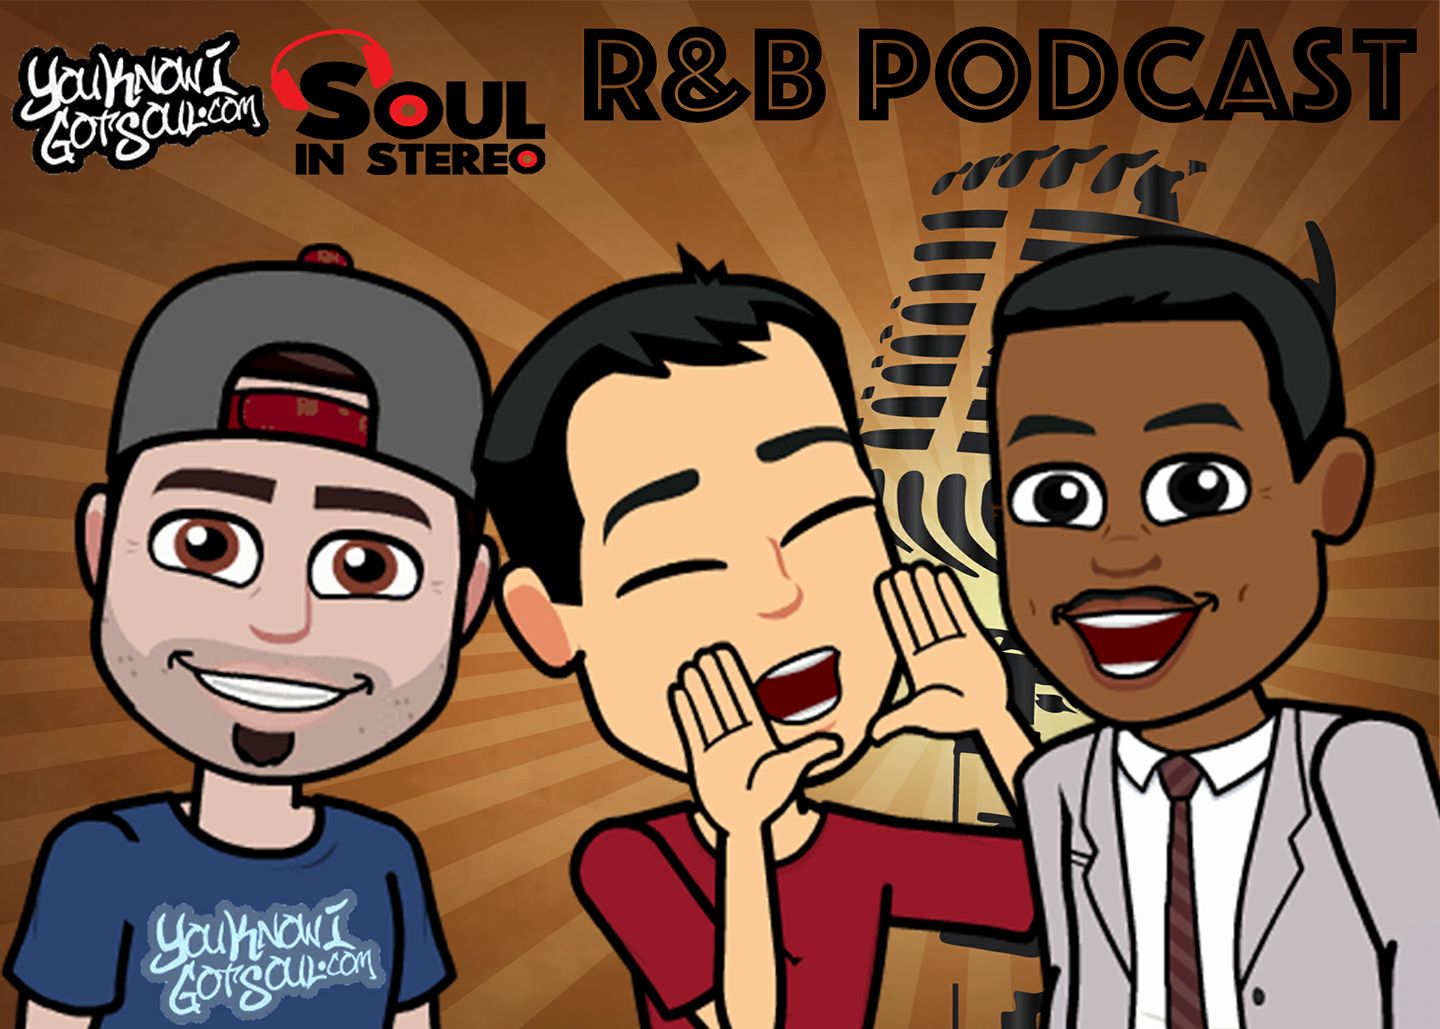 Best R&B Albums In 2017 – YouKnowIGotSoul R&B Podcast Episode #71